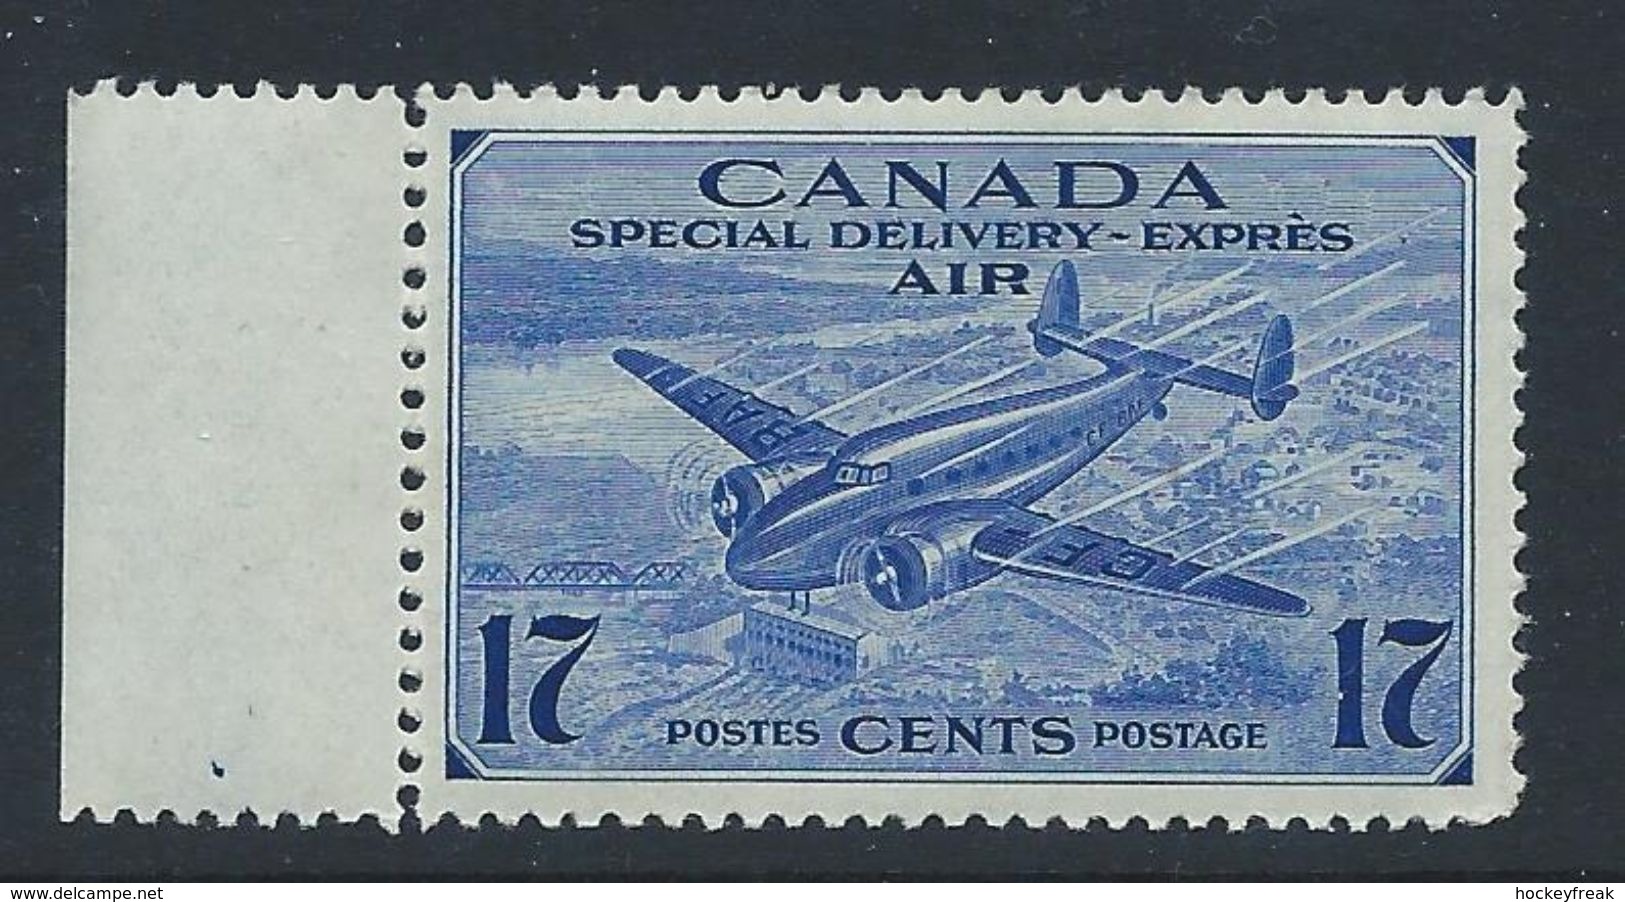 Canada 1943 - 17c Special Delivery Airmail Issue SG S14 Side Marginal MNH Cat £4.50 SG2015 - See Description/scans Below - Luchtpost: Expres